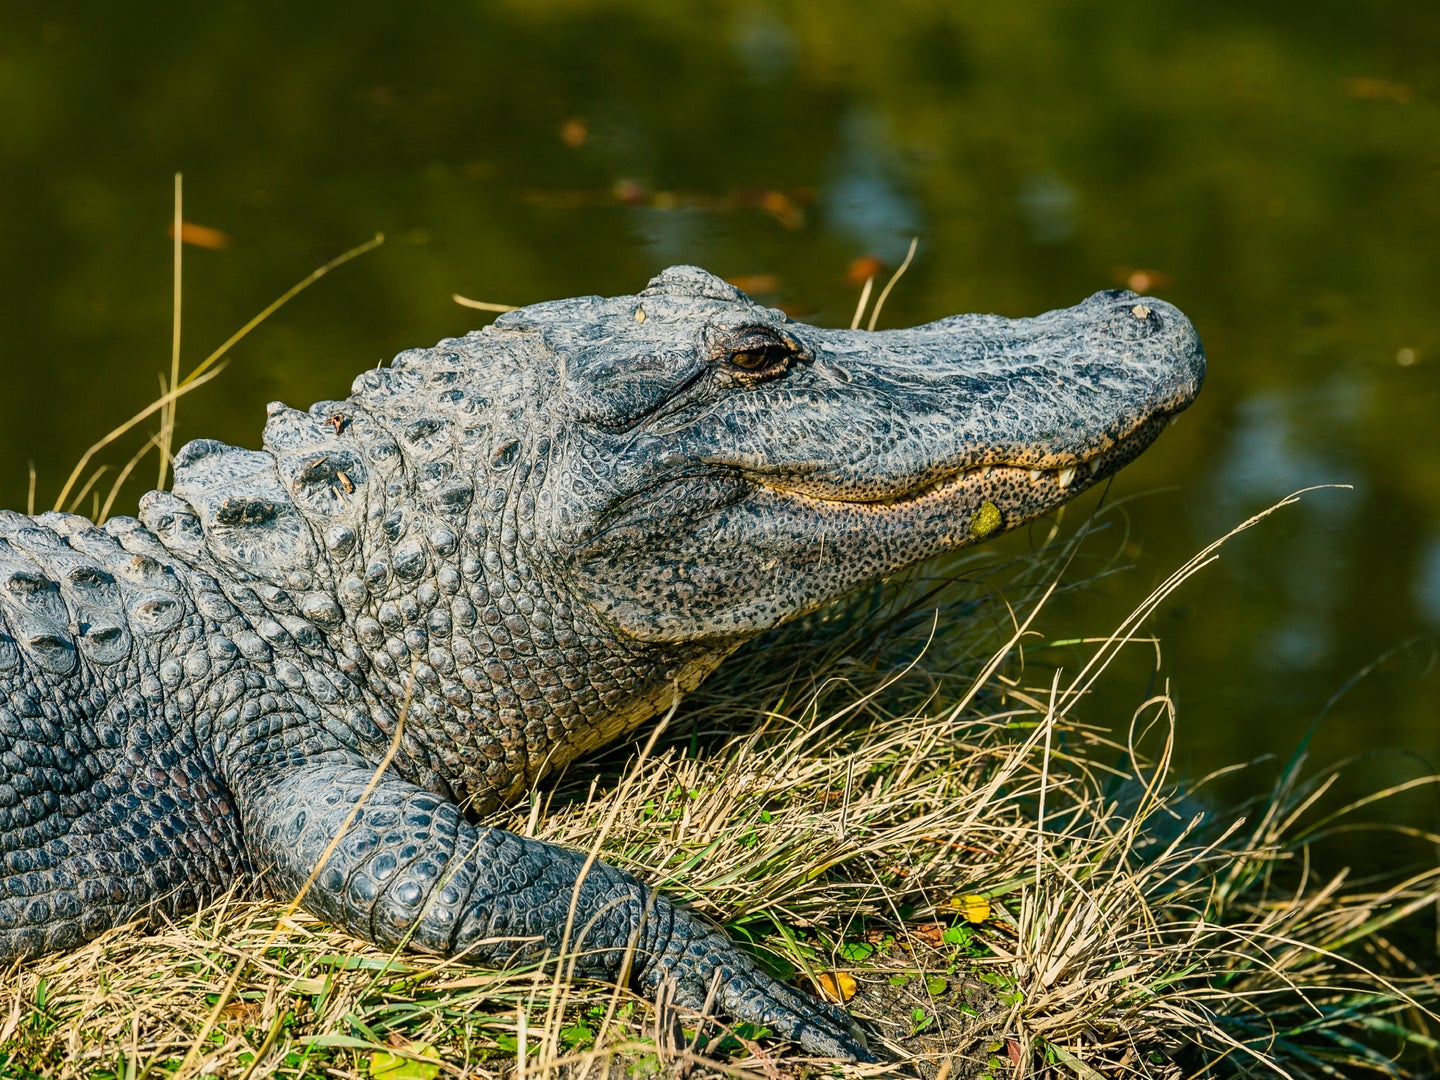 An alligator resting on a grassy bank near a body of water.